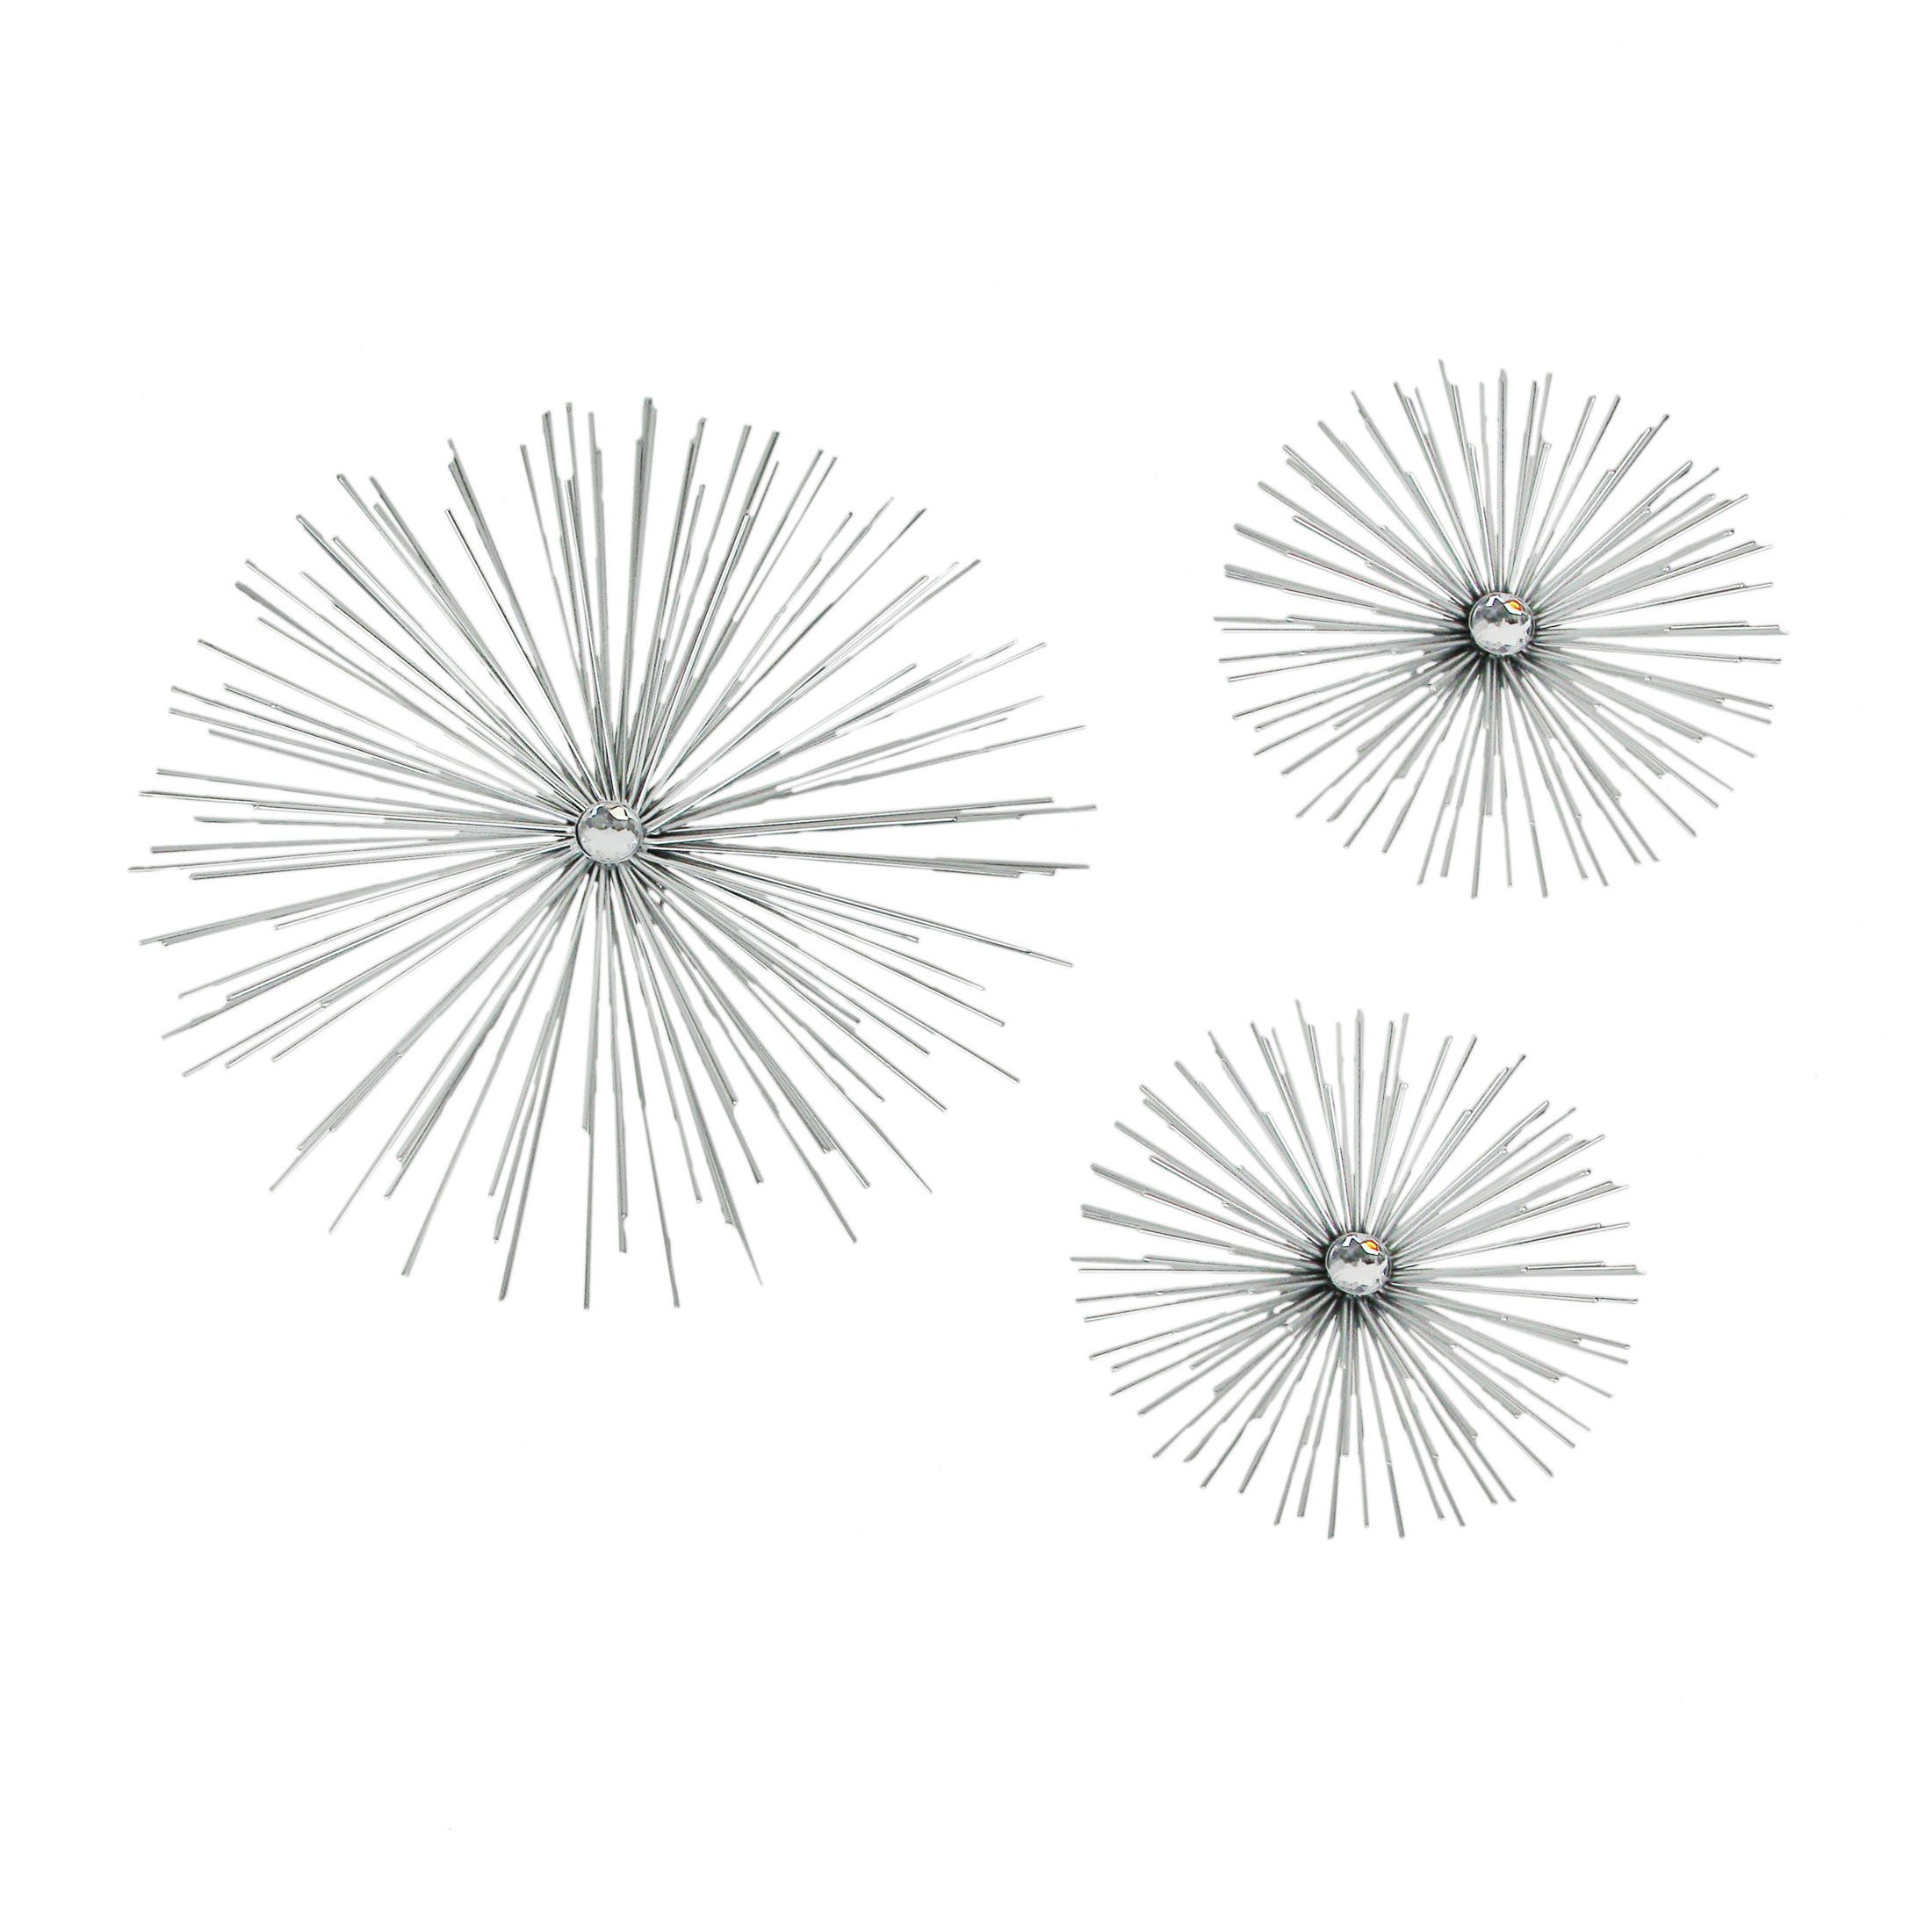 Everly Quinn 3 Piece Metal Jeweled Starburst Wall Décor Set | Wayfair Throughout Starburst Jeweled Hanging Wall Art (View 5 of 15)